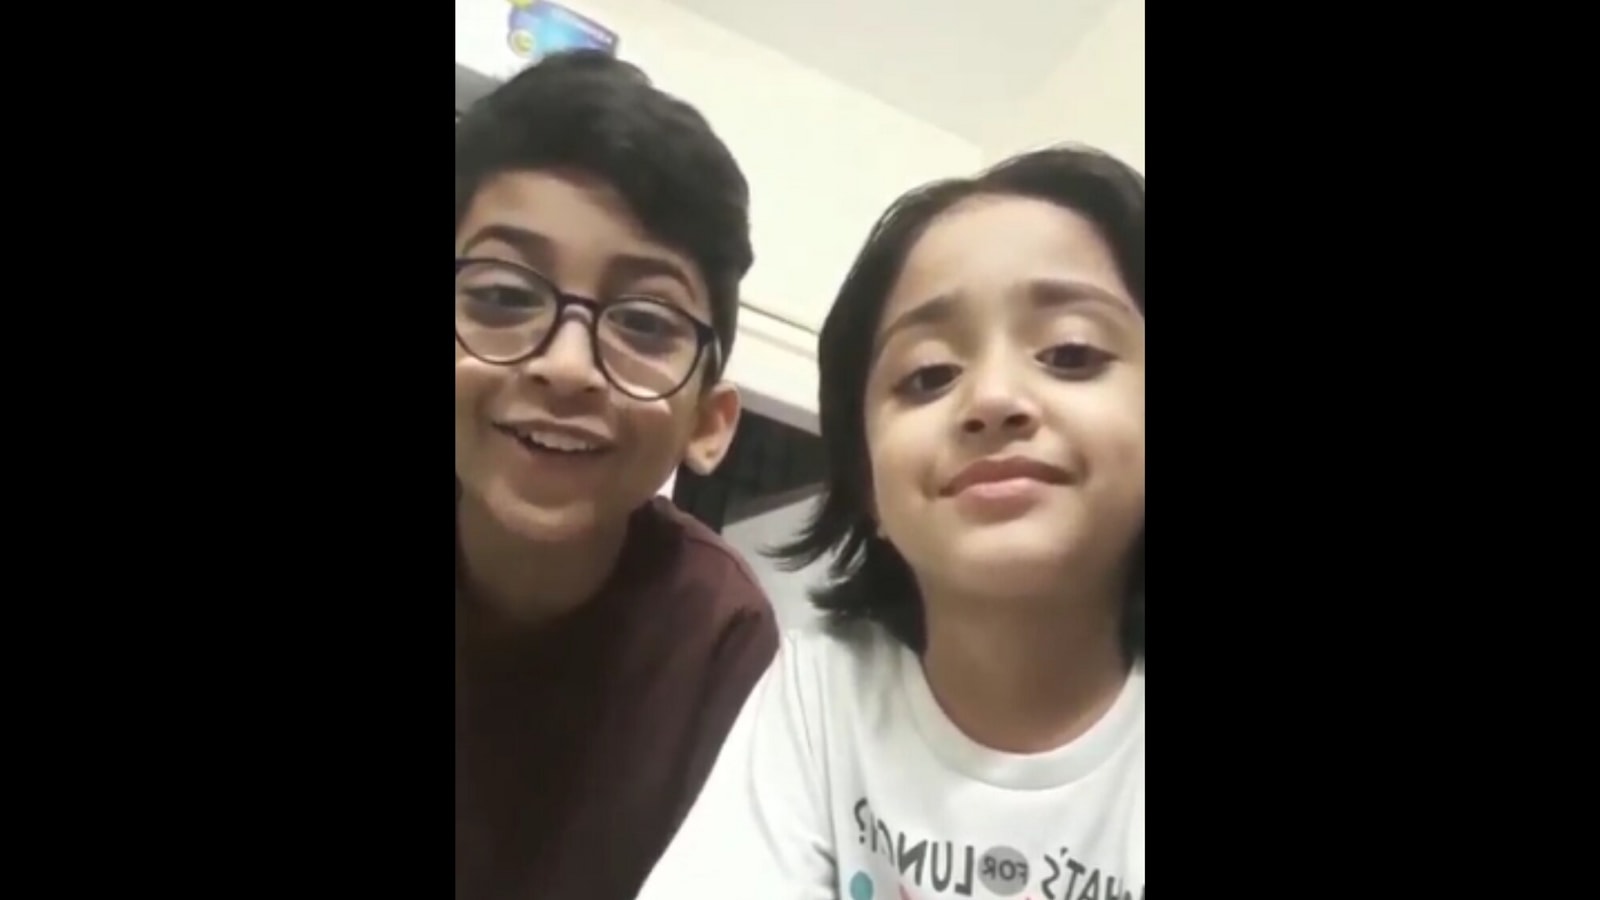 Sister And Brother Blackmail Rap Xxx Video - Cute little brother-sister duo's video goes viral, Yashraj Mukhate reacts.  Watch | Trending - Hindustan Times